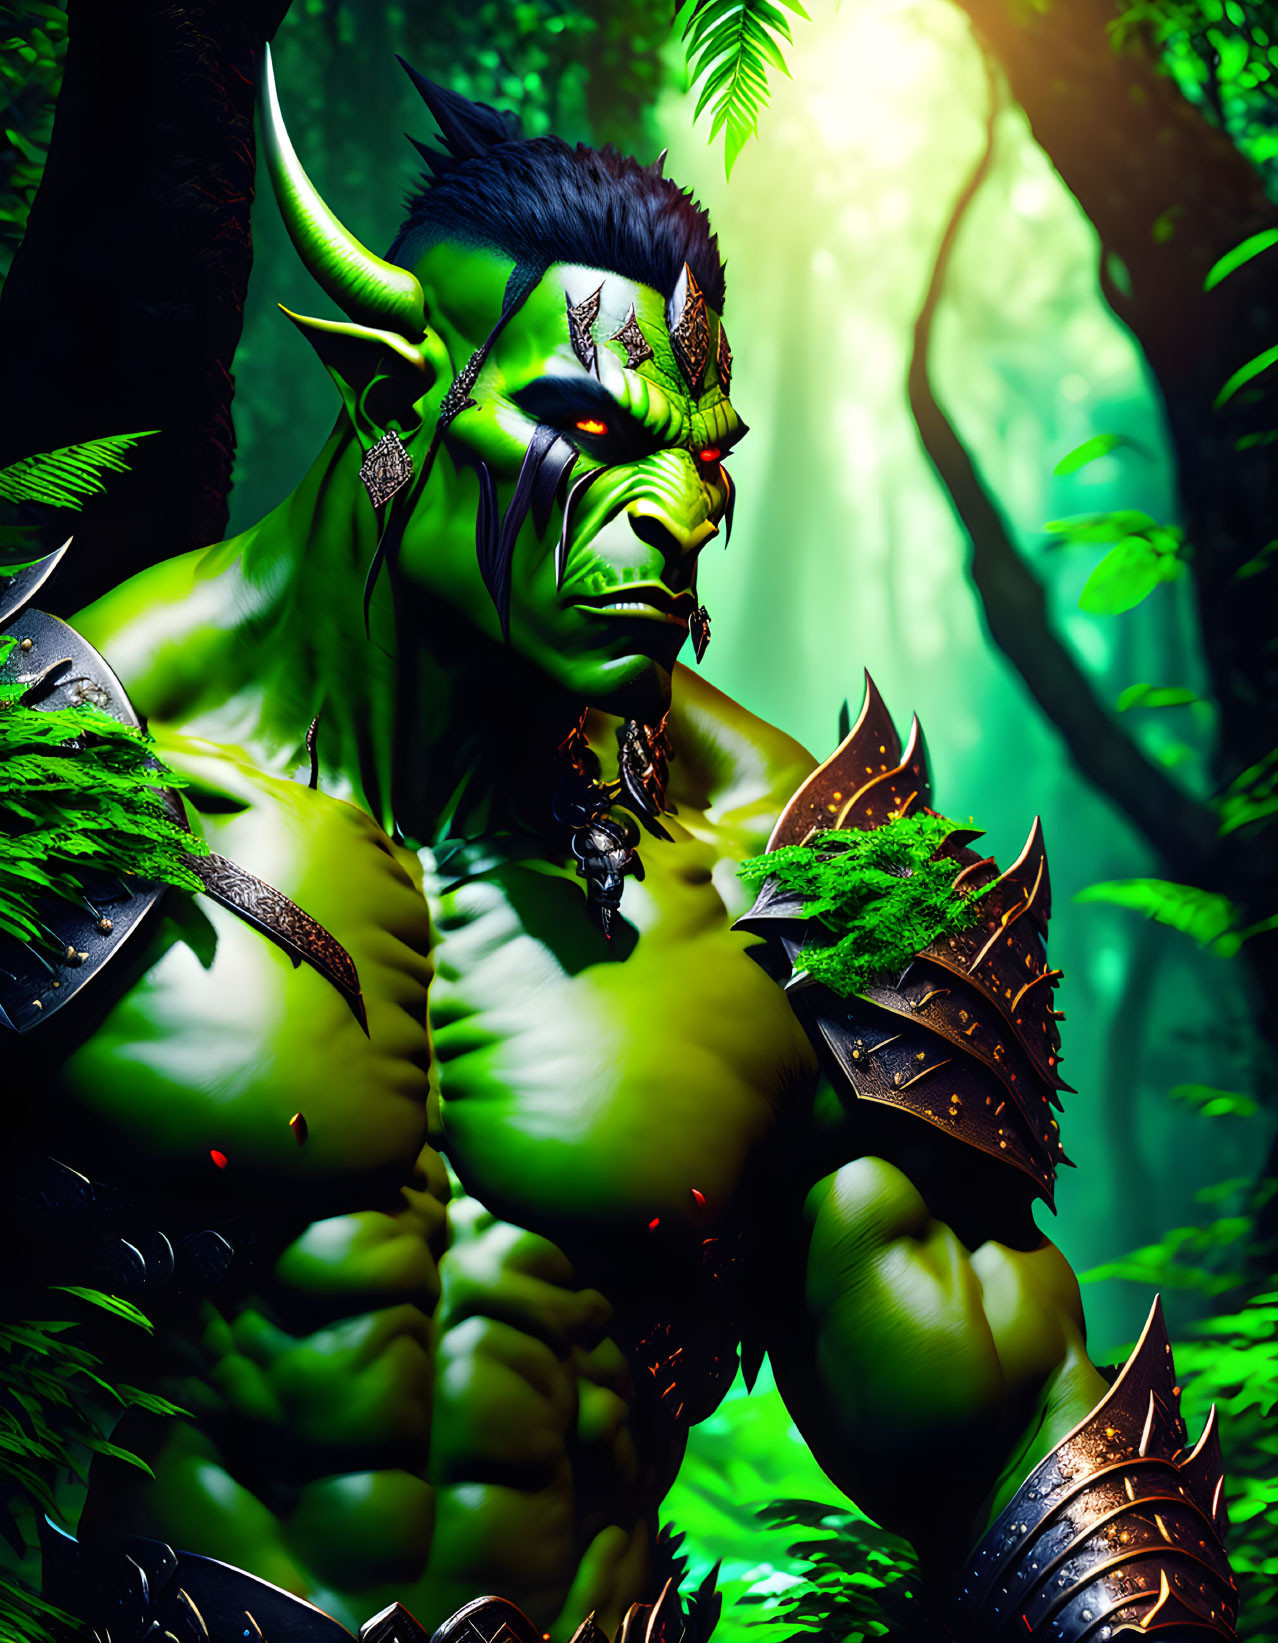 Mystical forest scene featuring imposing green-skinned orc